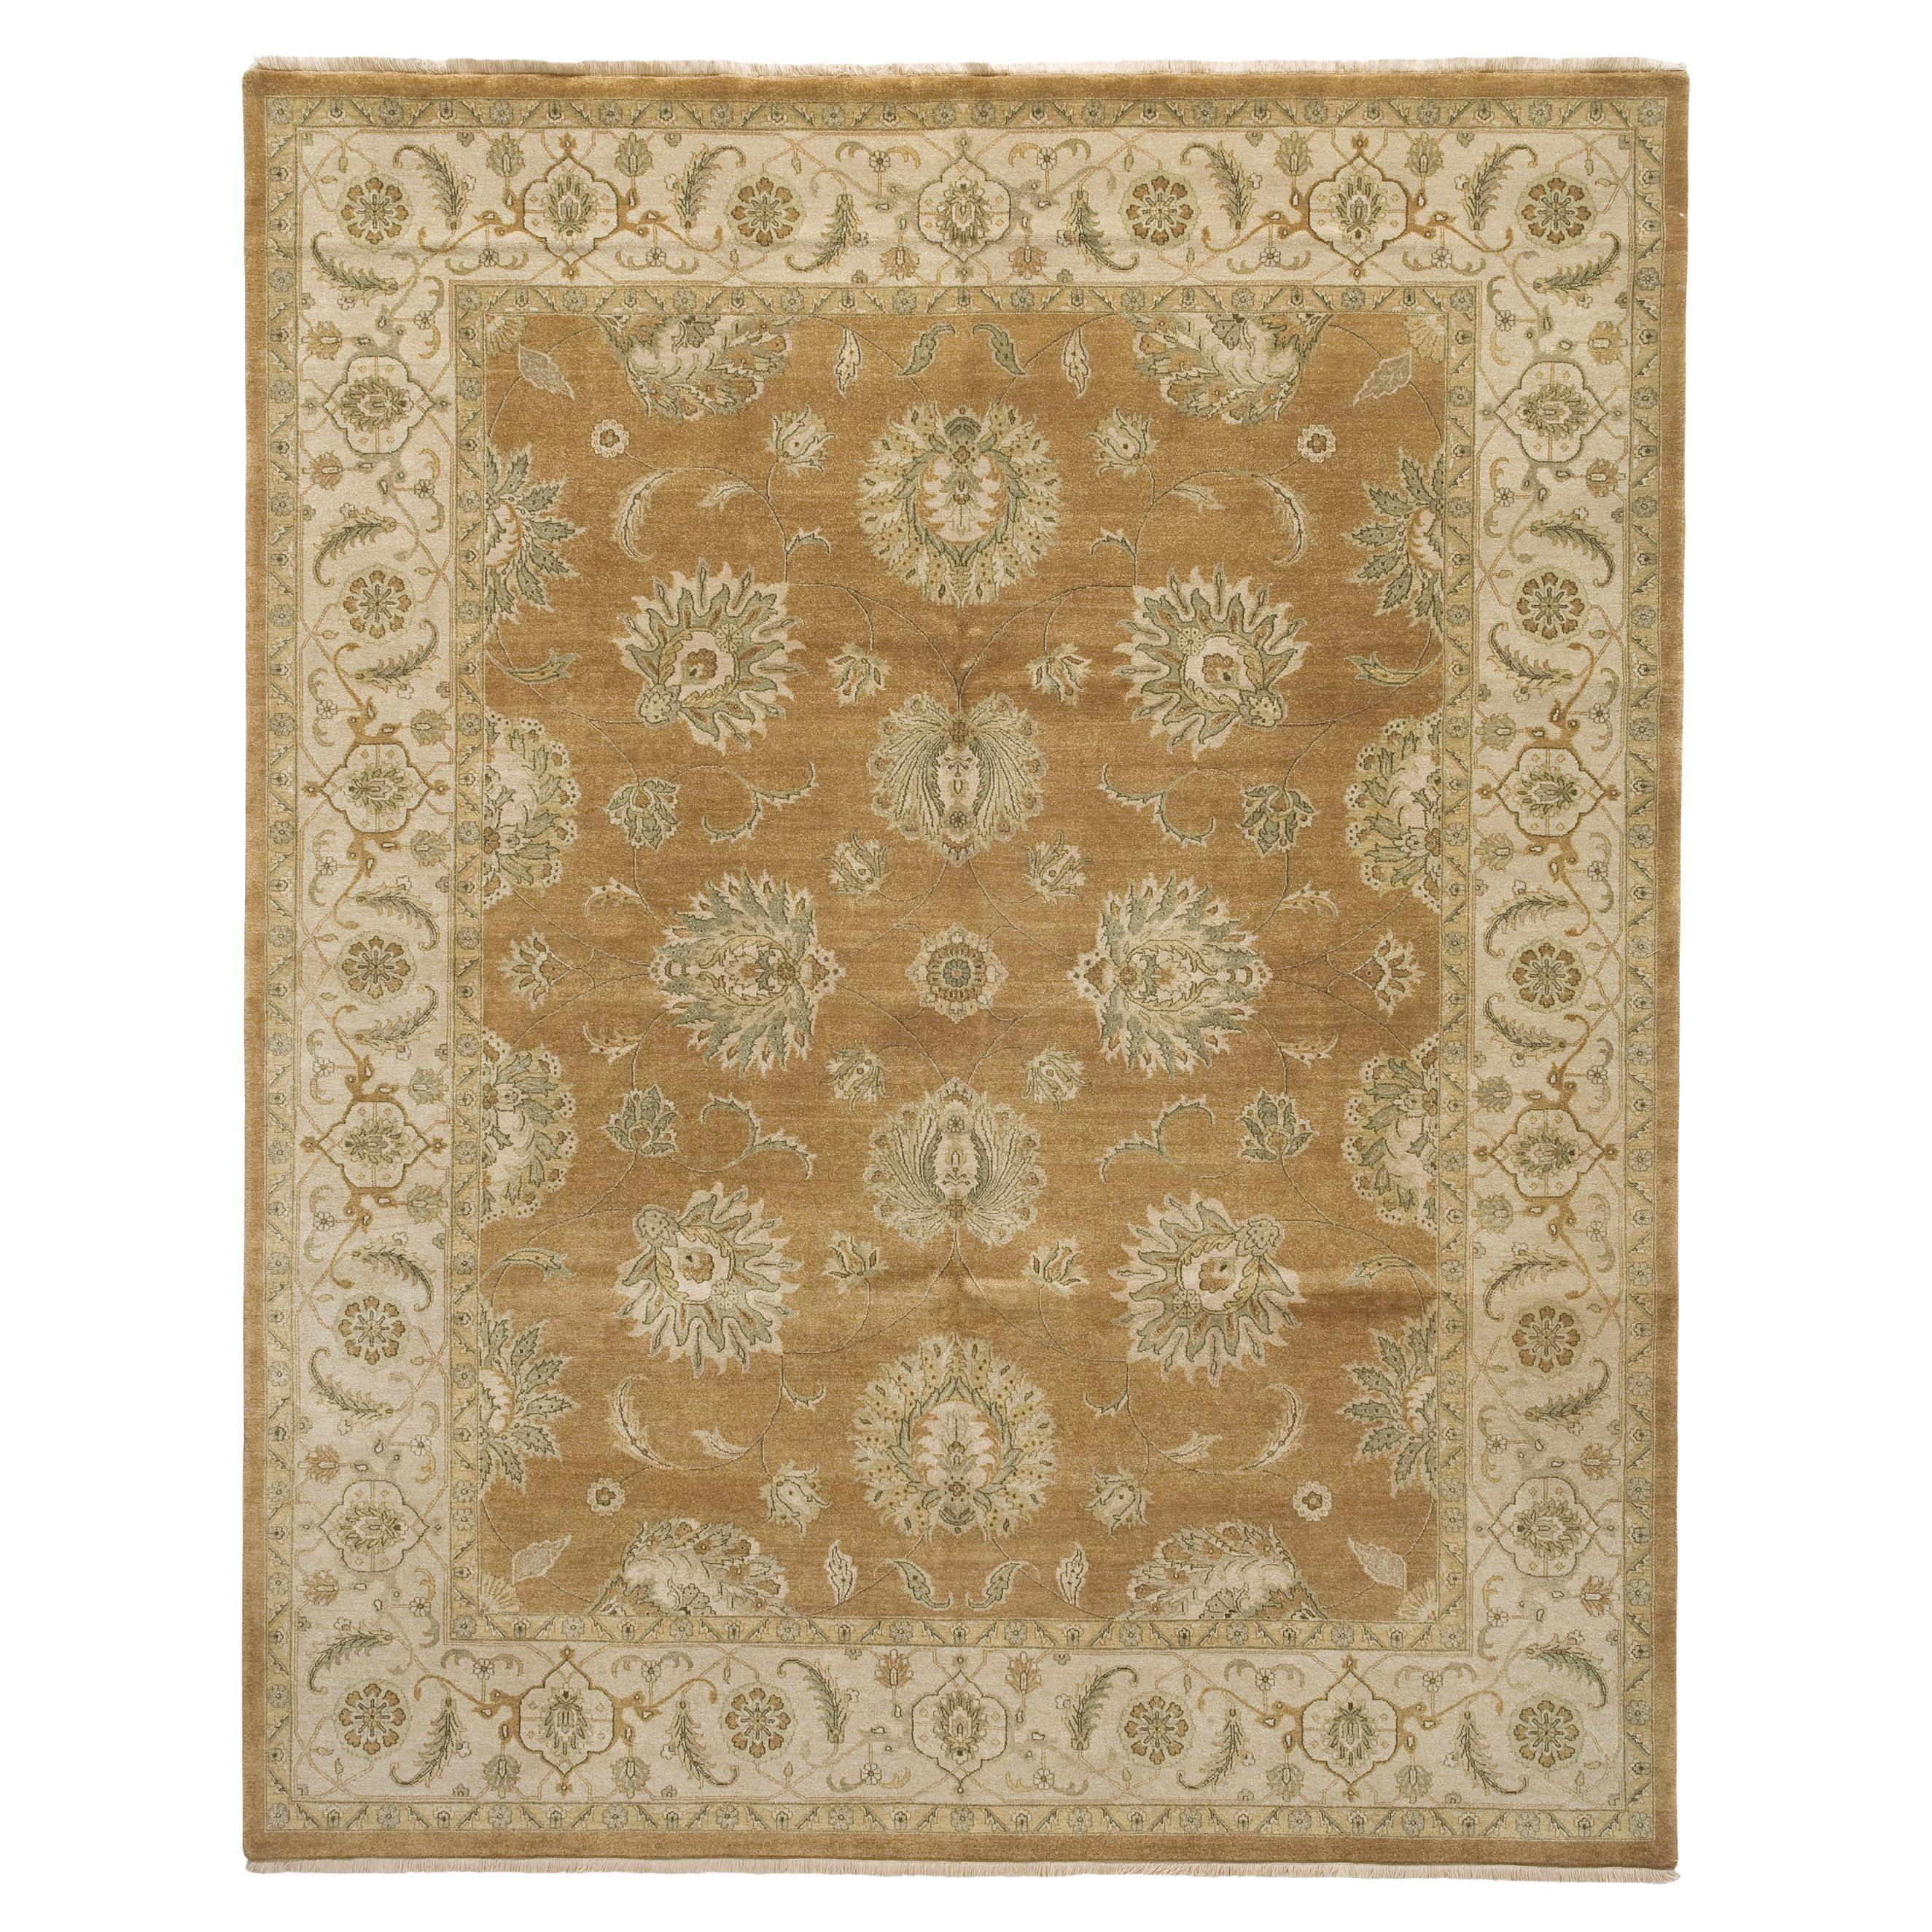 Luxury Traditional Hand-Knotted Benares Agra Bronze/Ivory 12x15 Rug